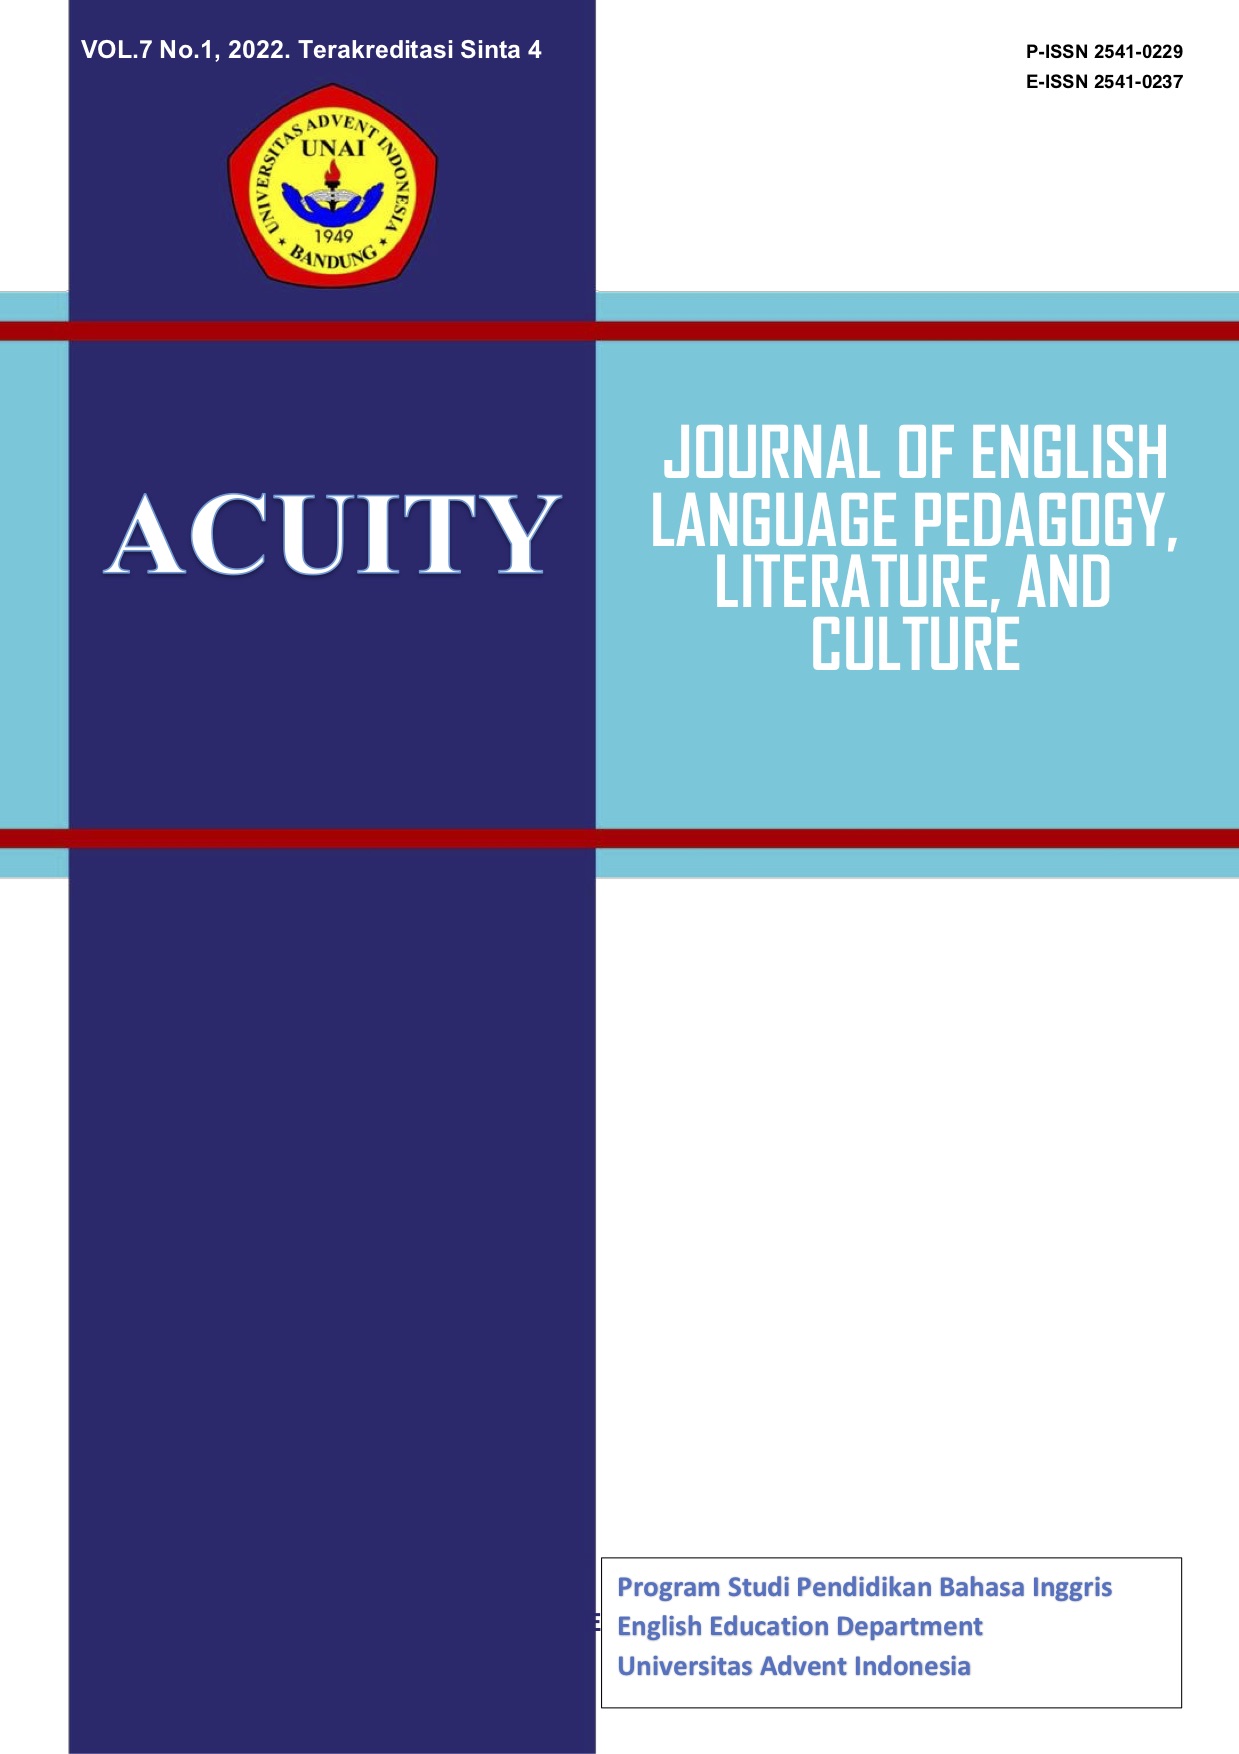 					View Vol. 7 No. 1 (2022): Acuity: Journal of English Language Pedagogy, Literature & Culture
				